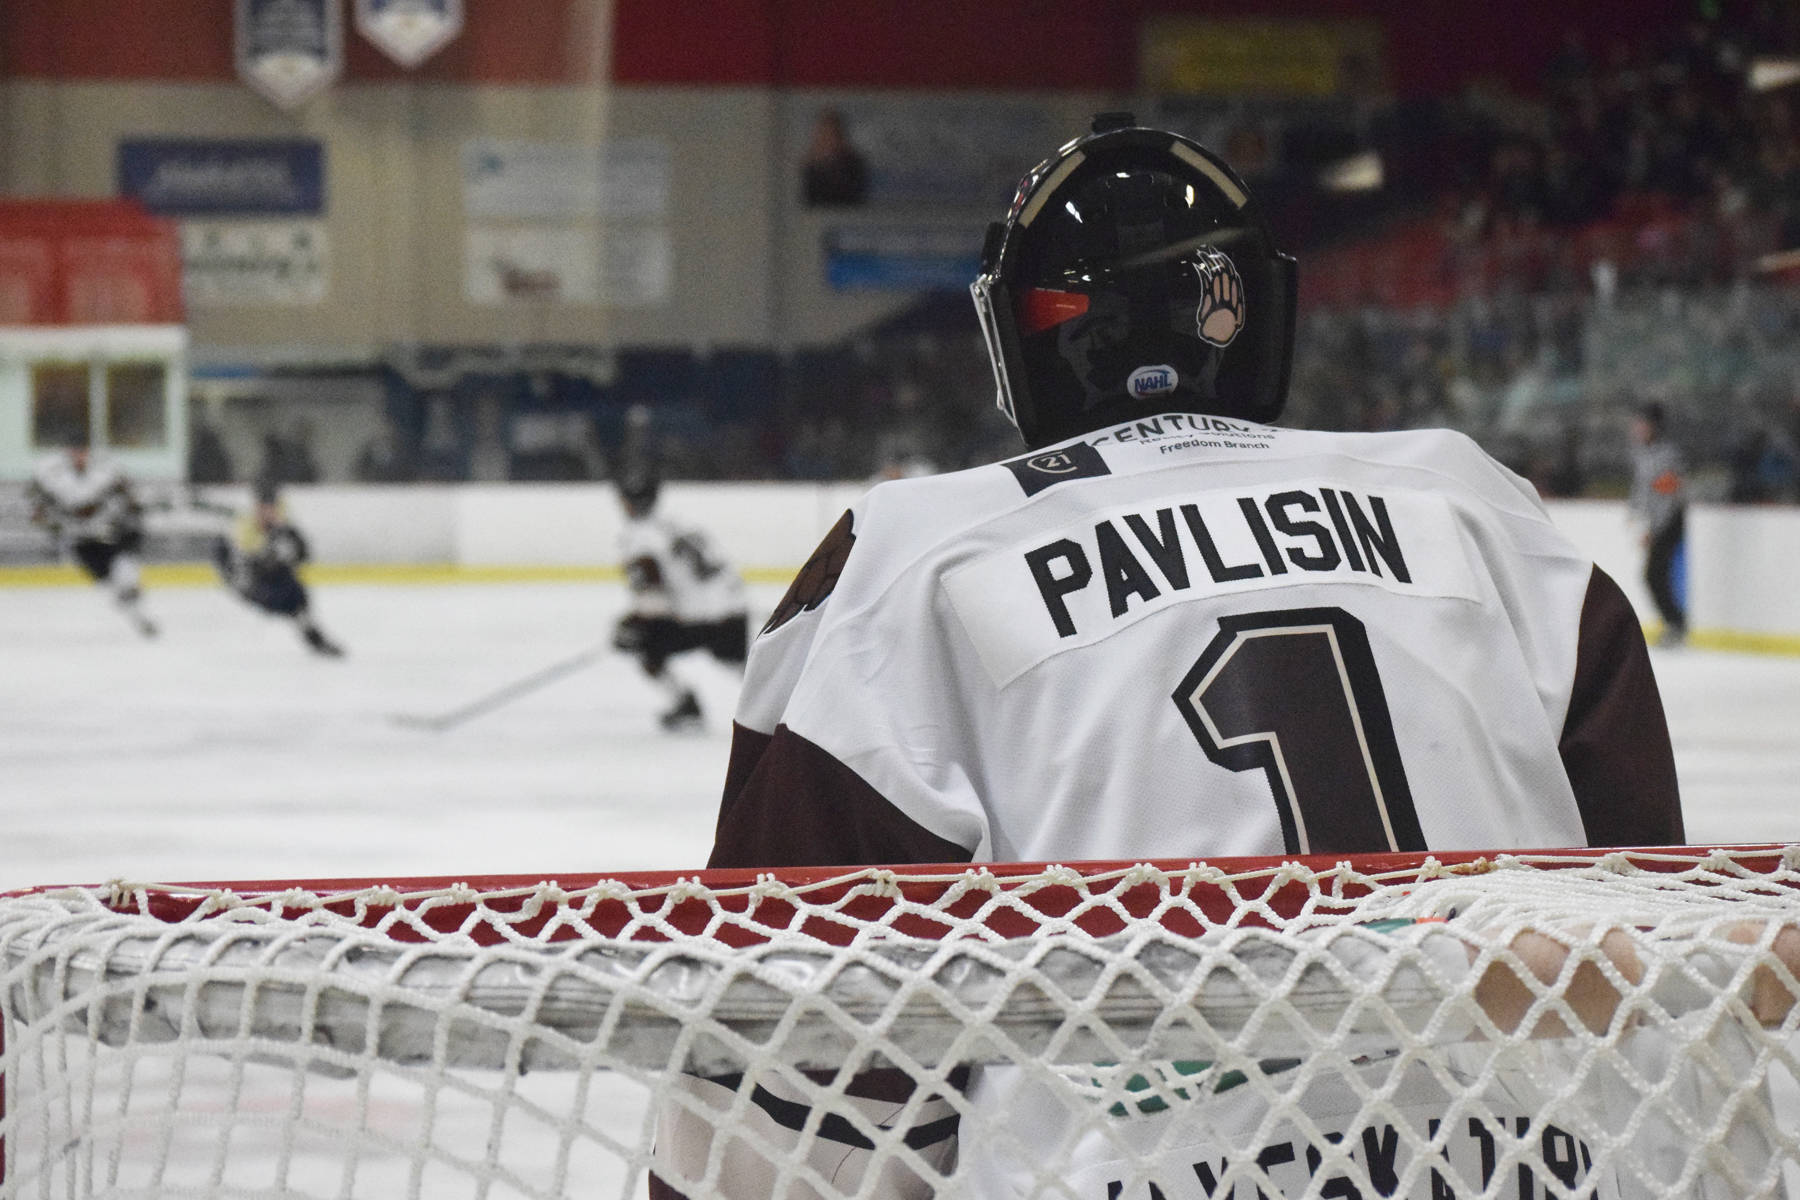 Kenai River Brown Bears goalkeeper Landon Pavlisin keeps an eye on the action during a game against the Janesville Jets, Saturday, Oct. 12, 2019, at the Soldotna Regional Sports Complex in Soldotna, Alaska. (Photo by Joey Klecka/Peninsula Clarion)